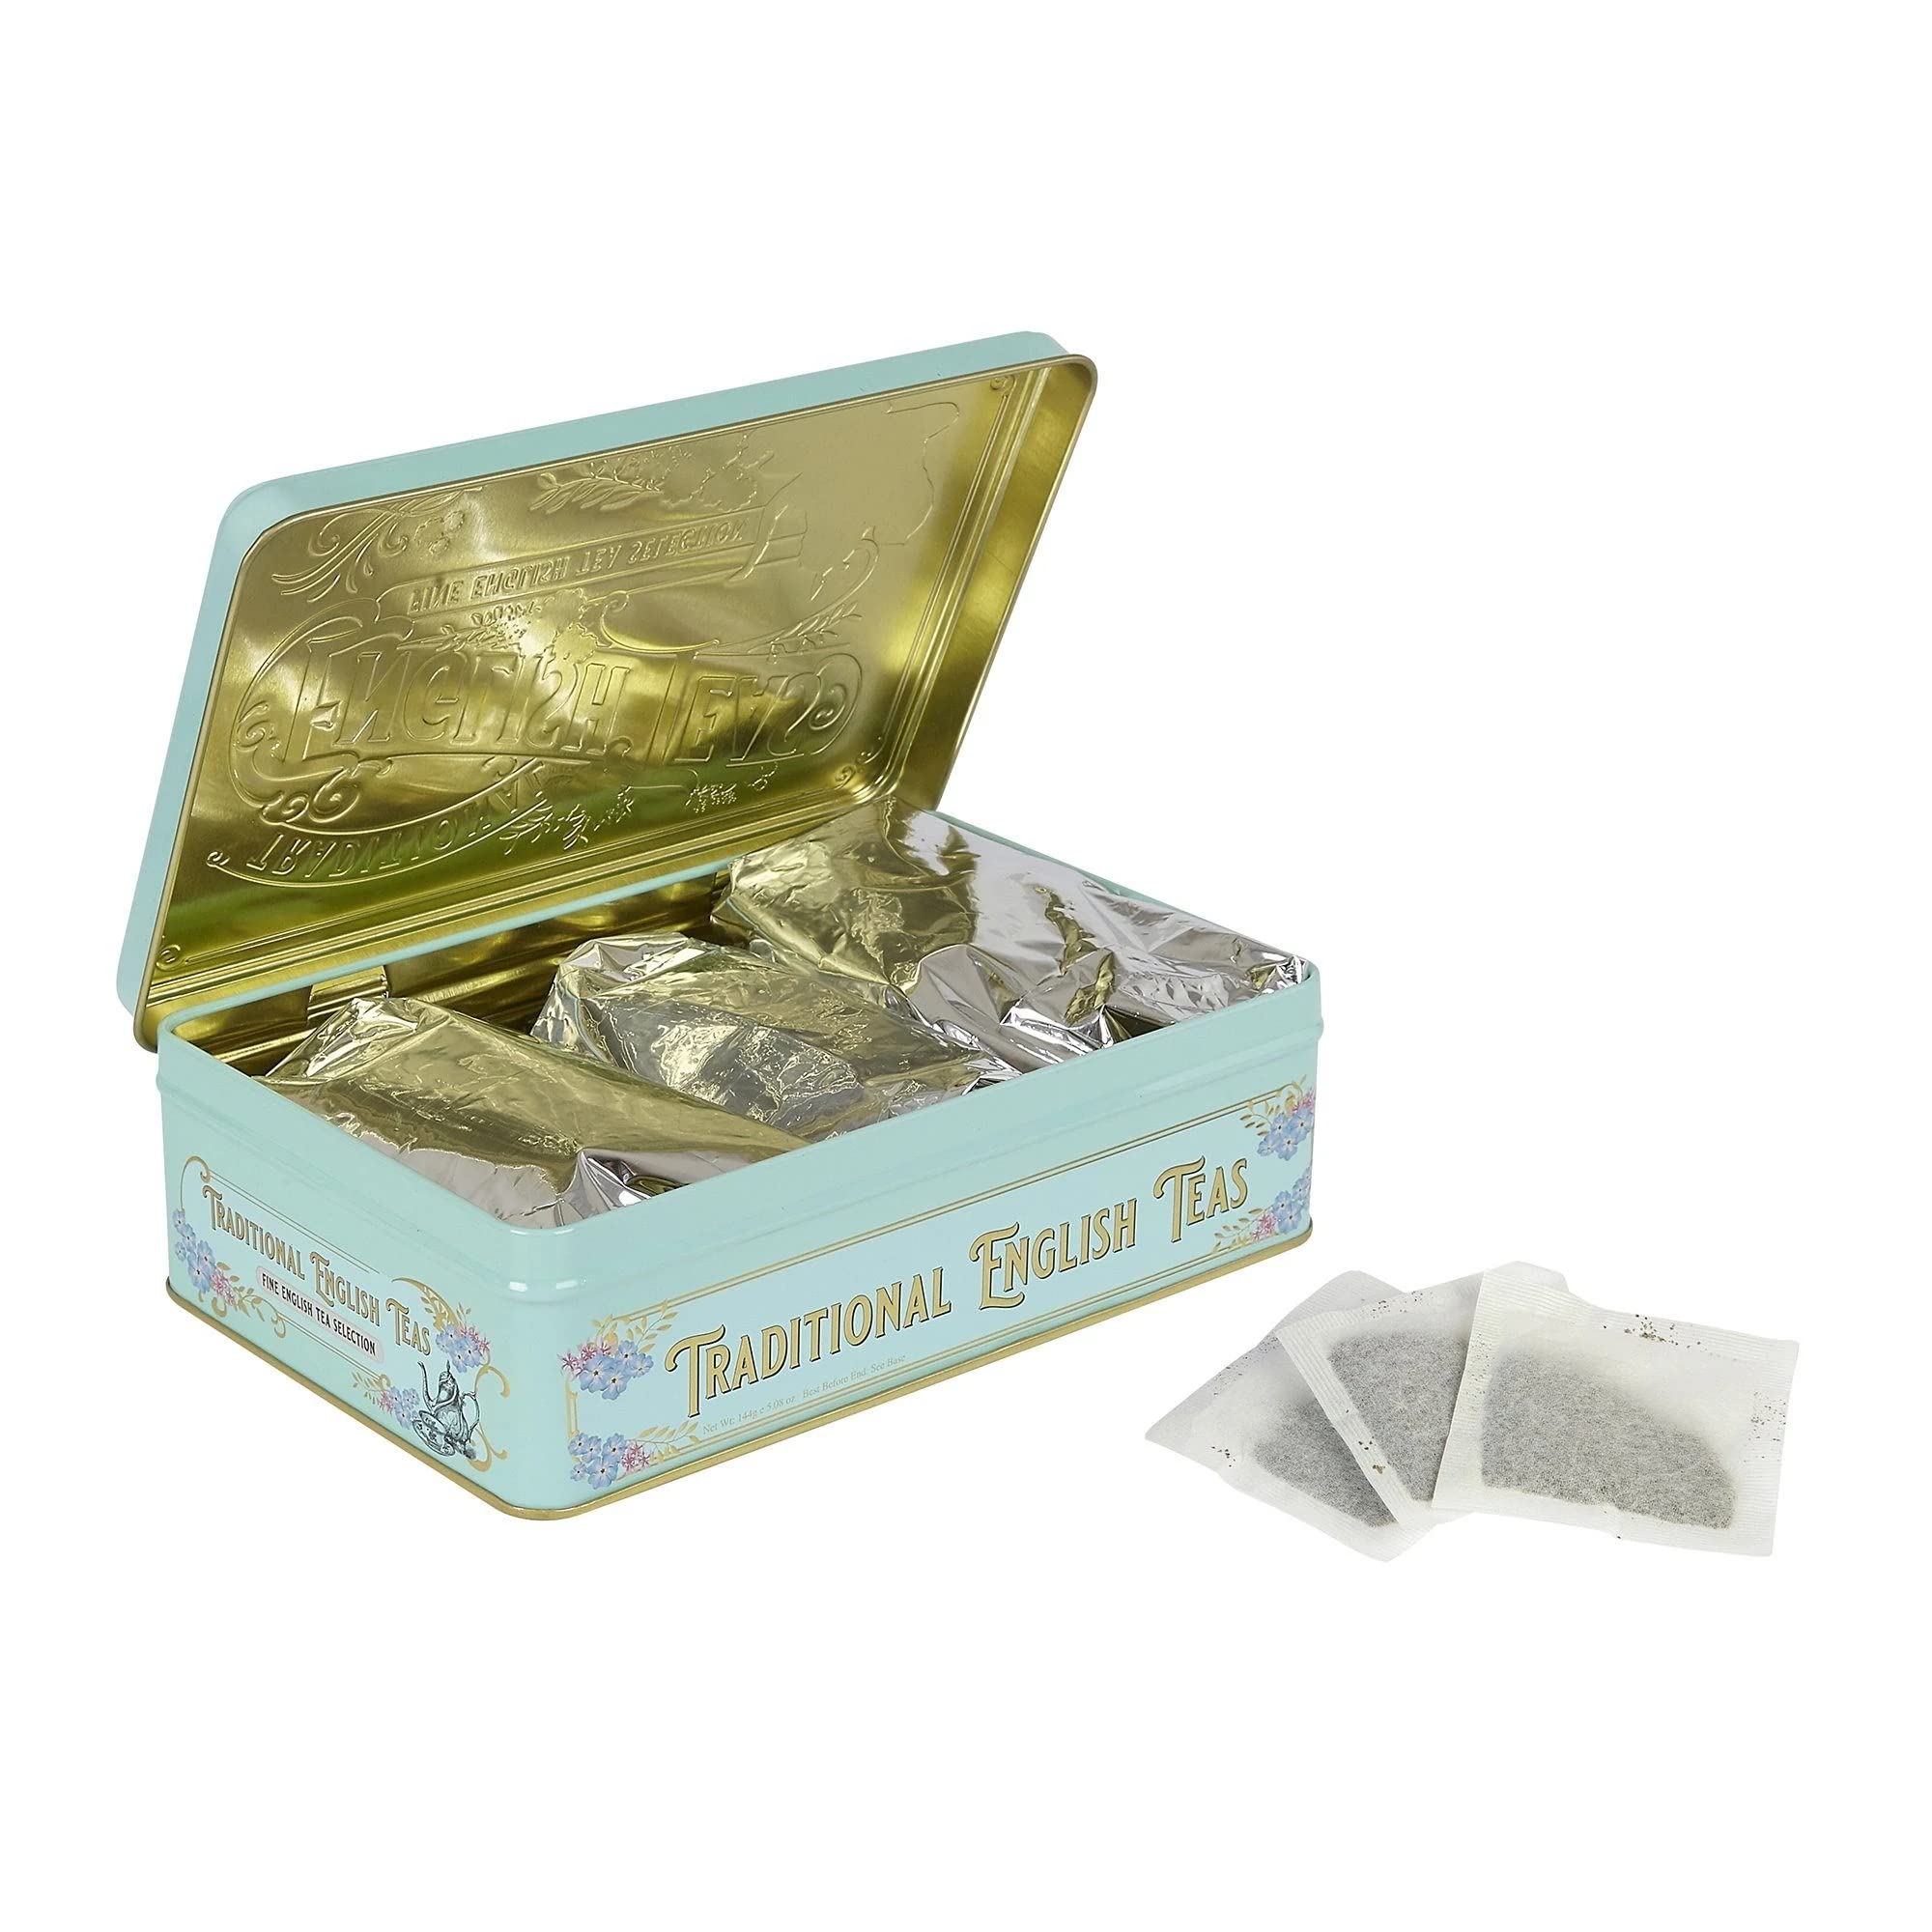 New English Teas Vintage Victorian Tea Gift Tin with 72 Assorted English Teabags for Tea Lovers, Forget Me Not - English Breakfast Tea, Earl Grey